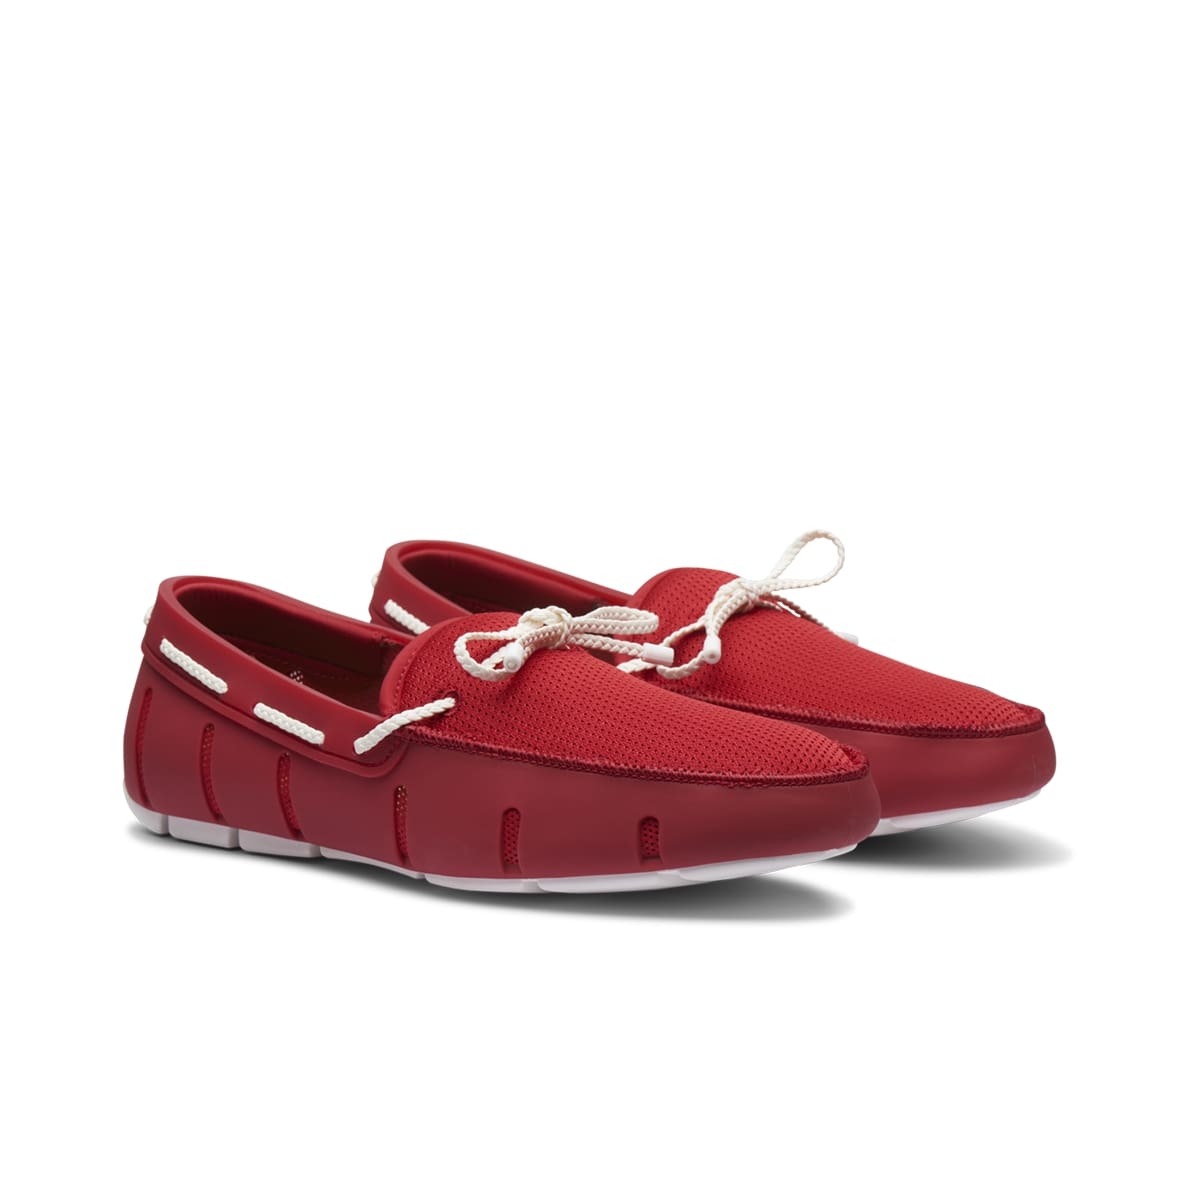 BRAIDED LACE LOAFER - RED